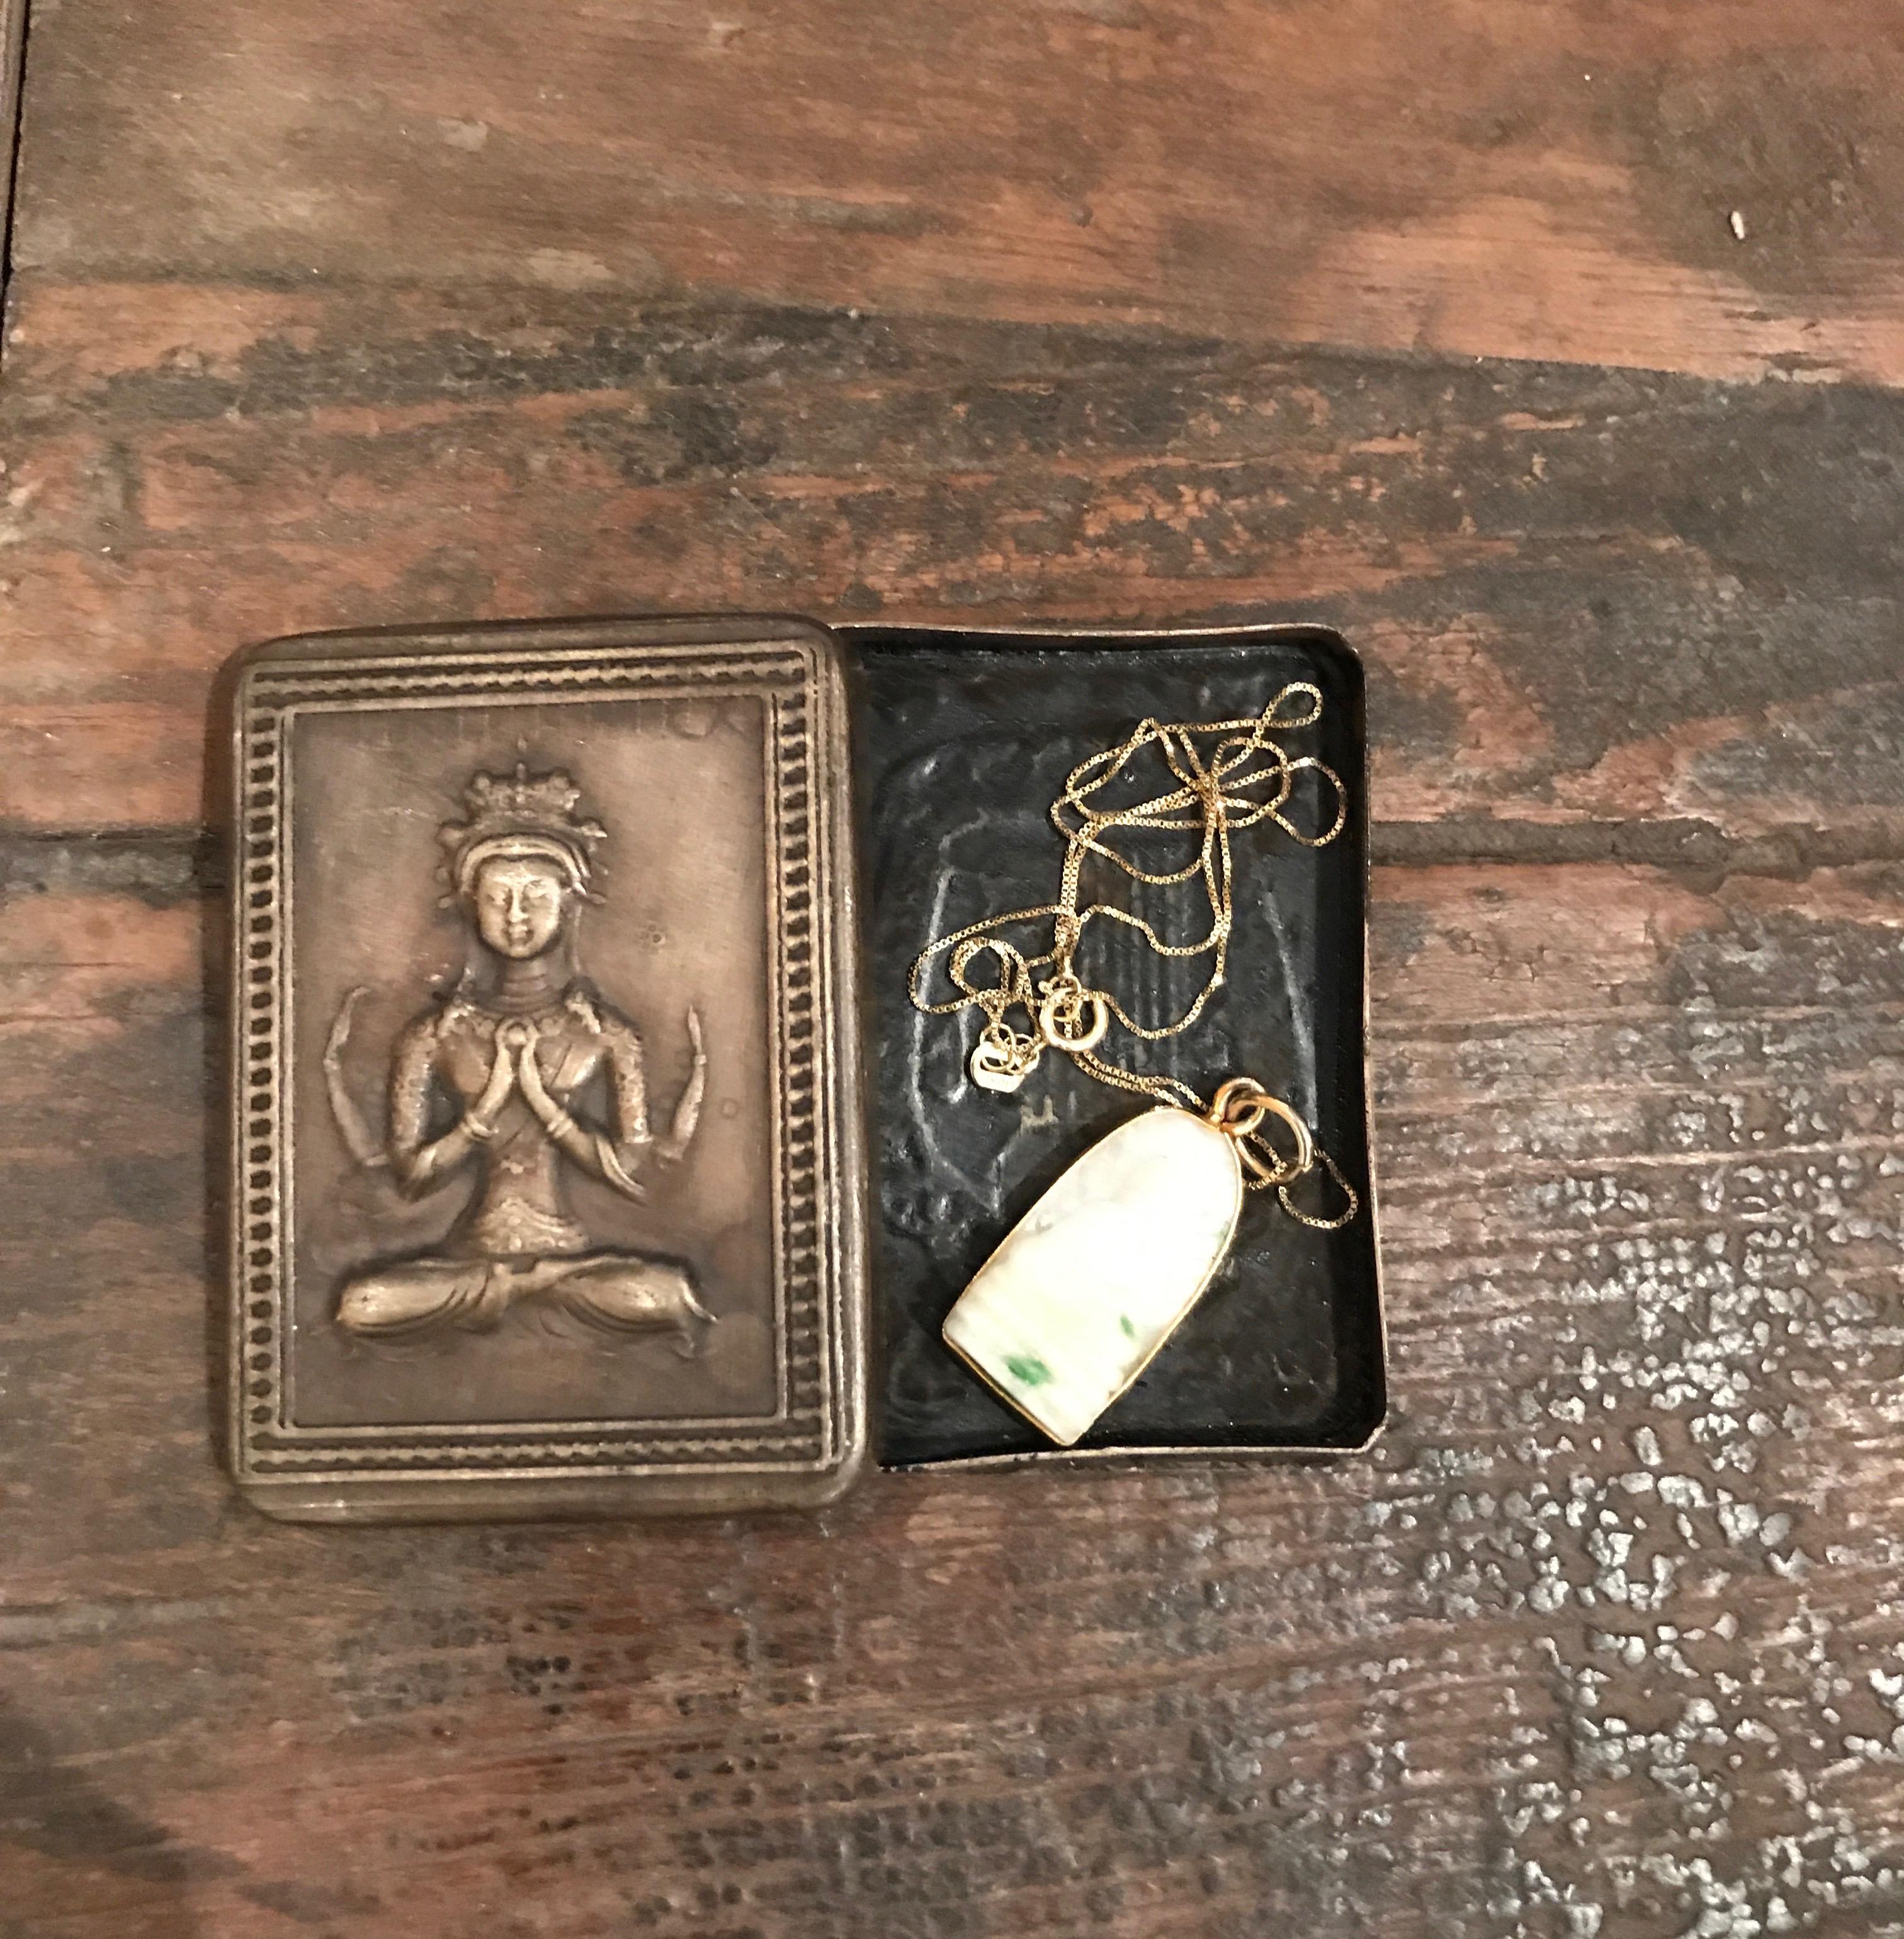 Repoussé Bronze Repousse Ink Boxes with Seated Buddha